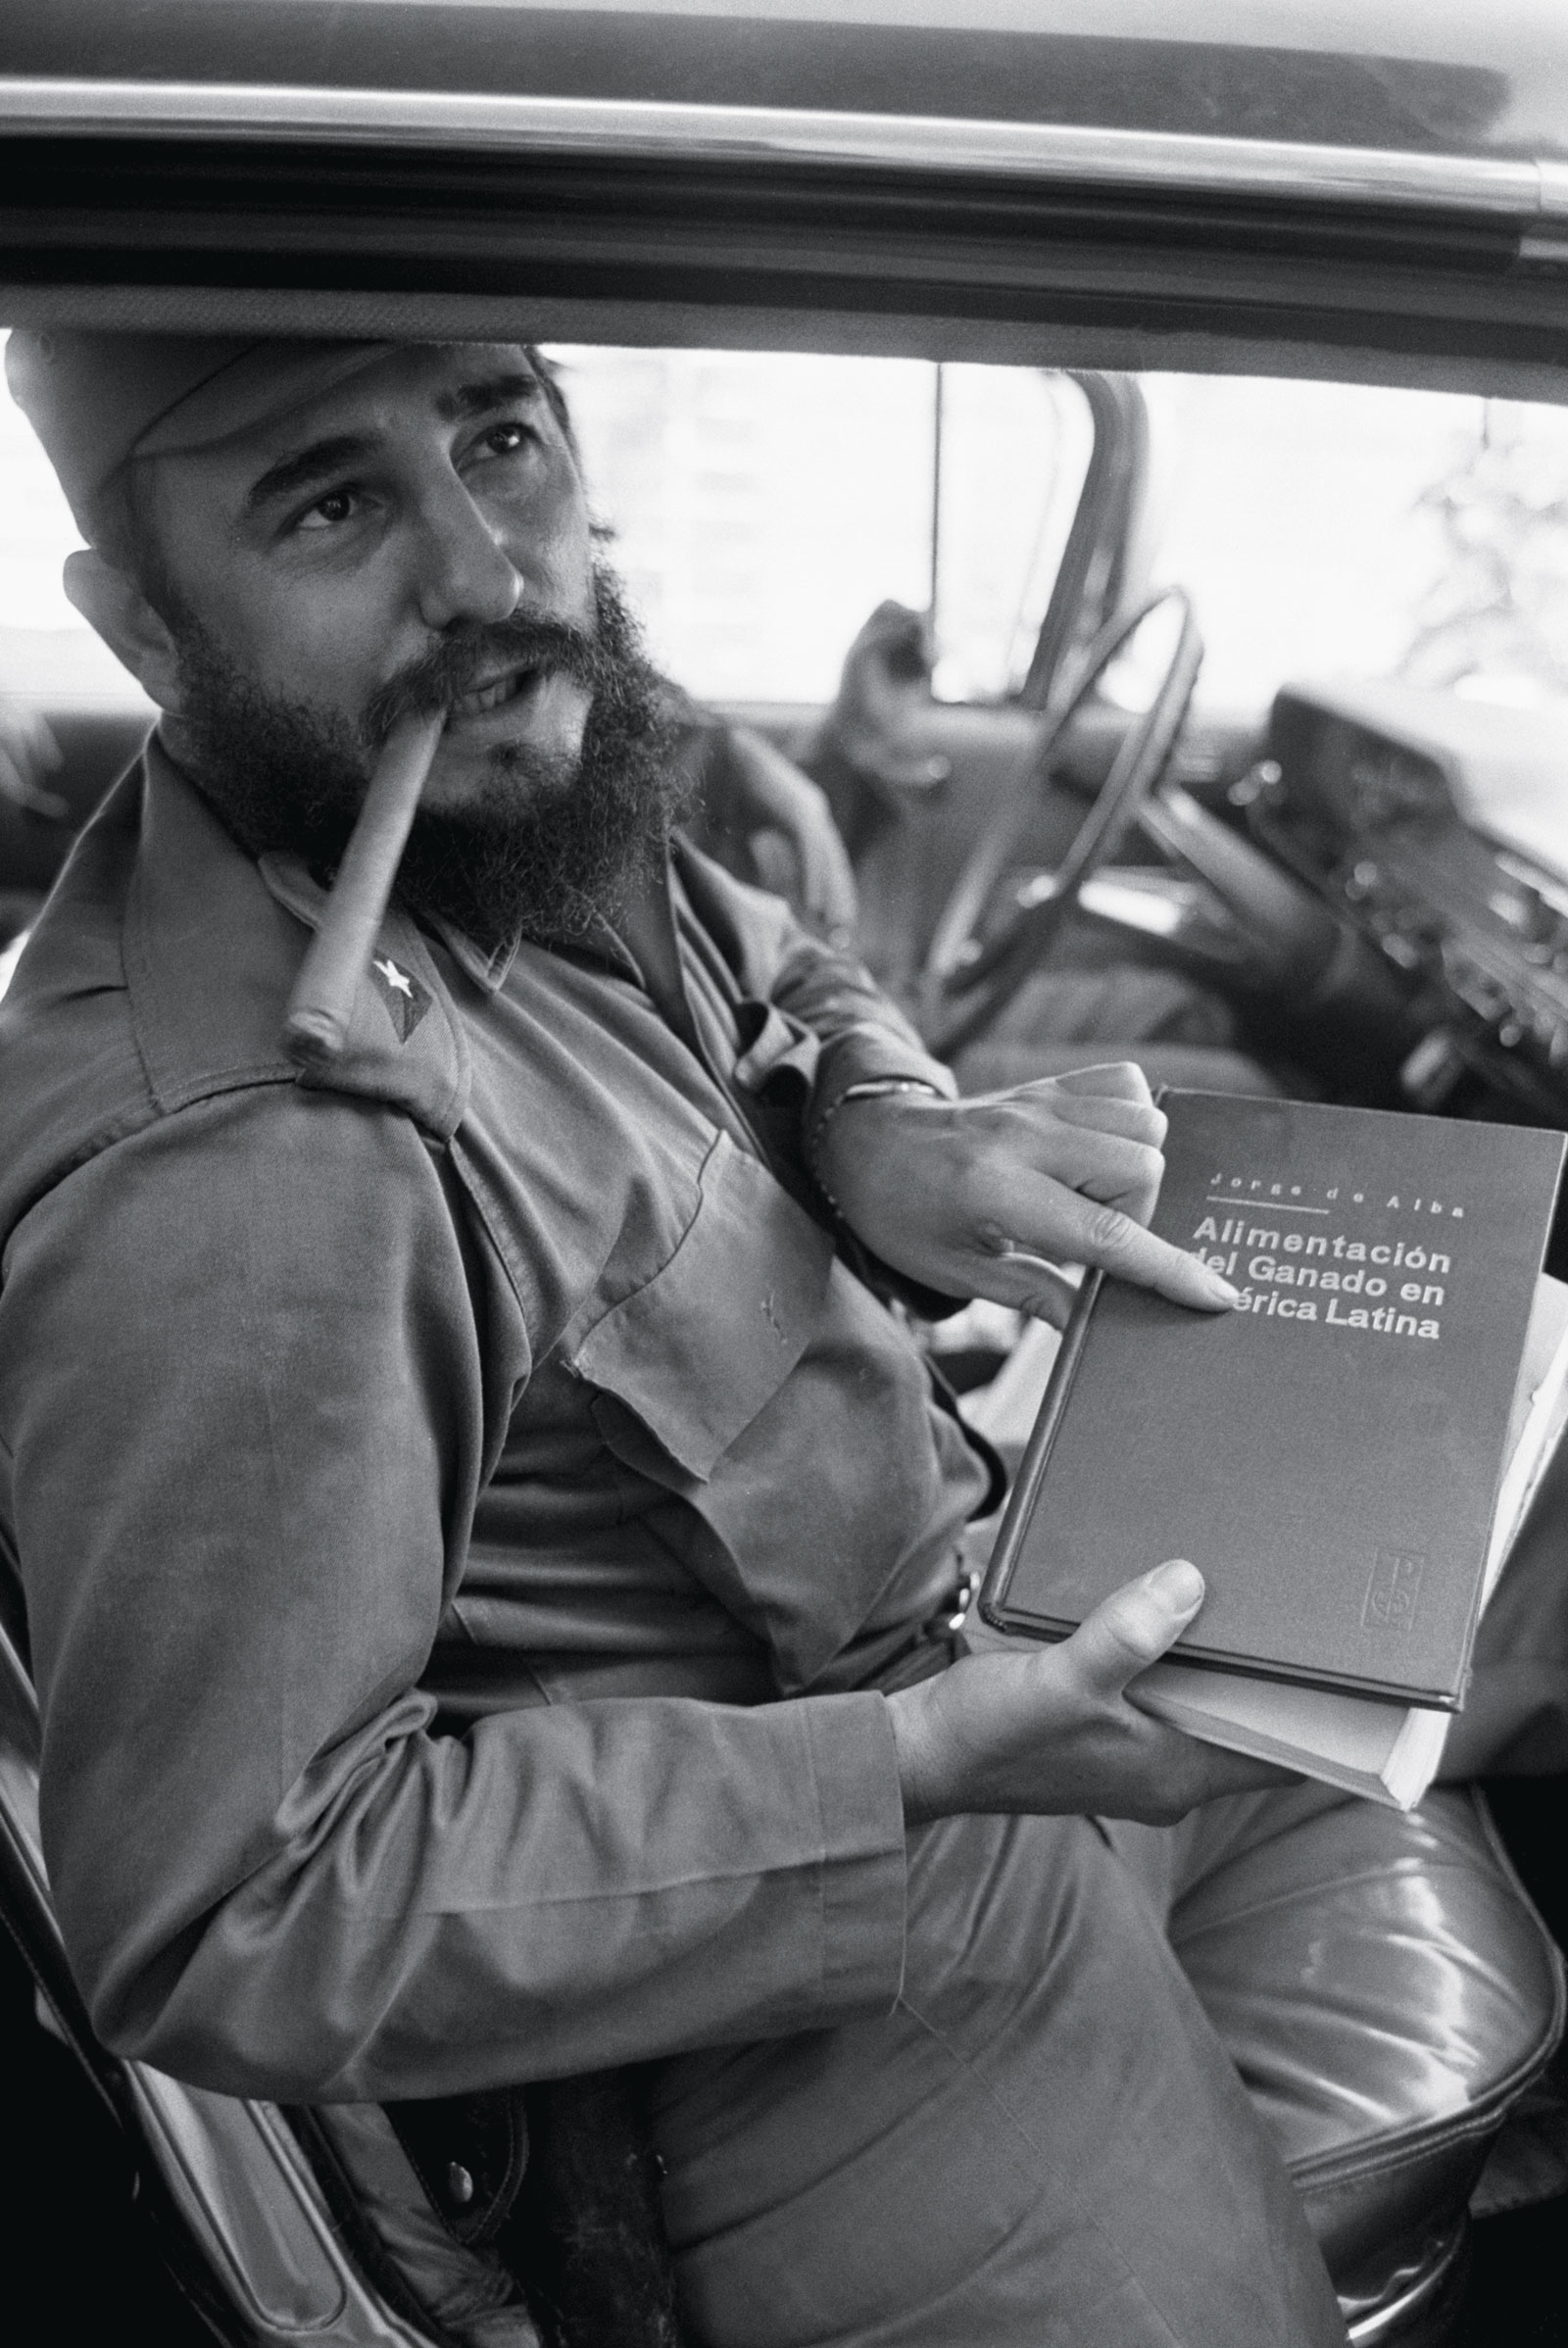 Fidel Castro holding <em>The Feeding of Cattle in Latin America</em>, by Mexican author Jorge de Alba, 1964